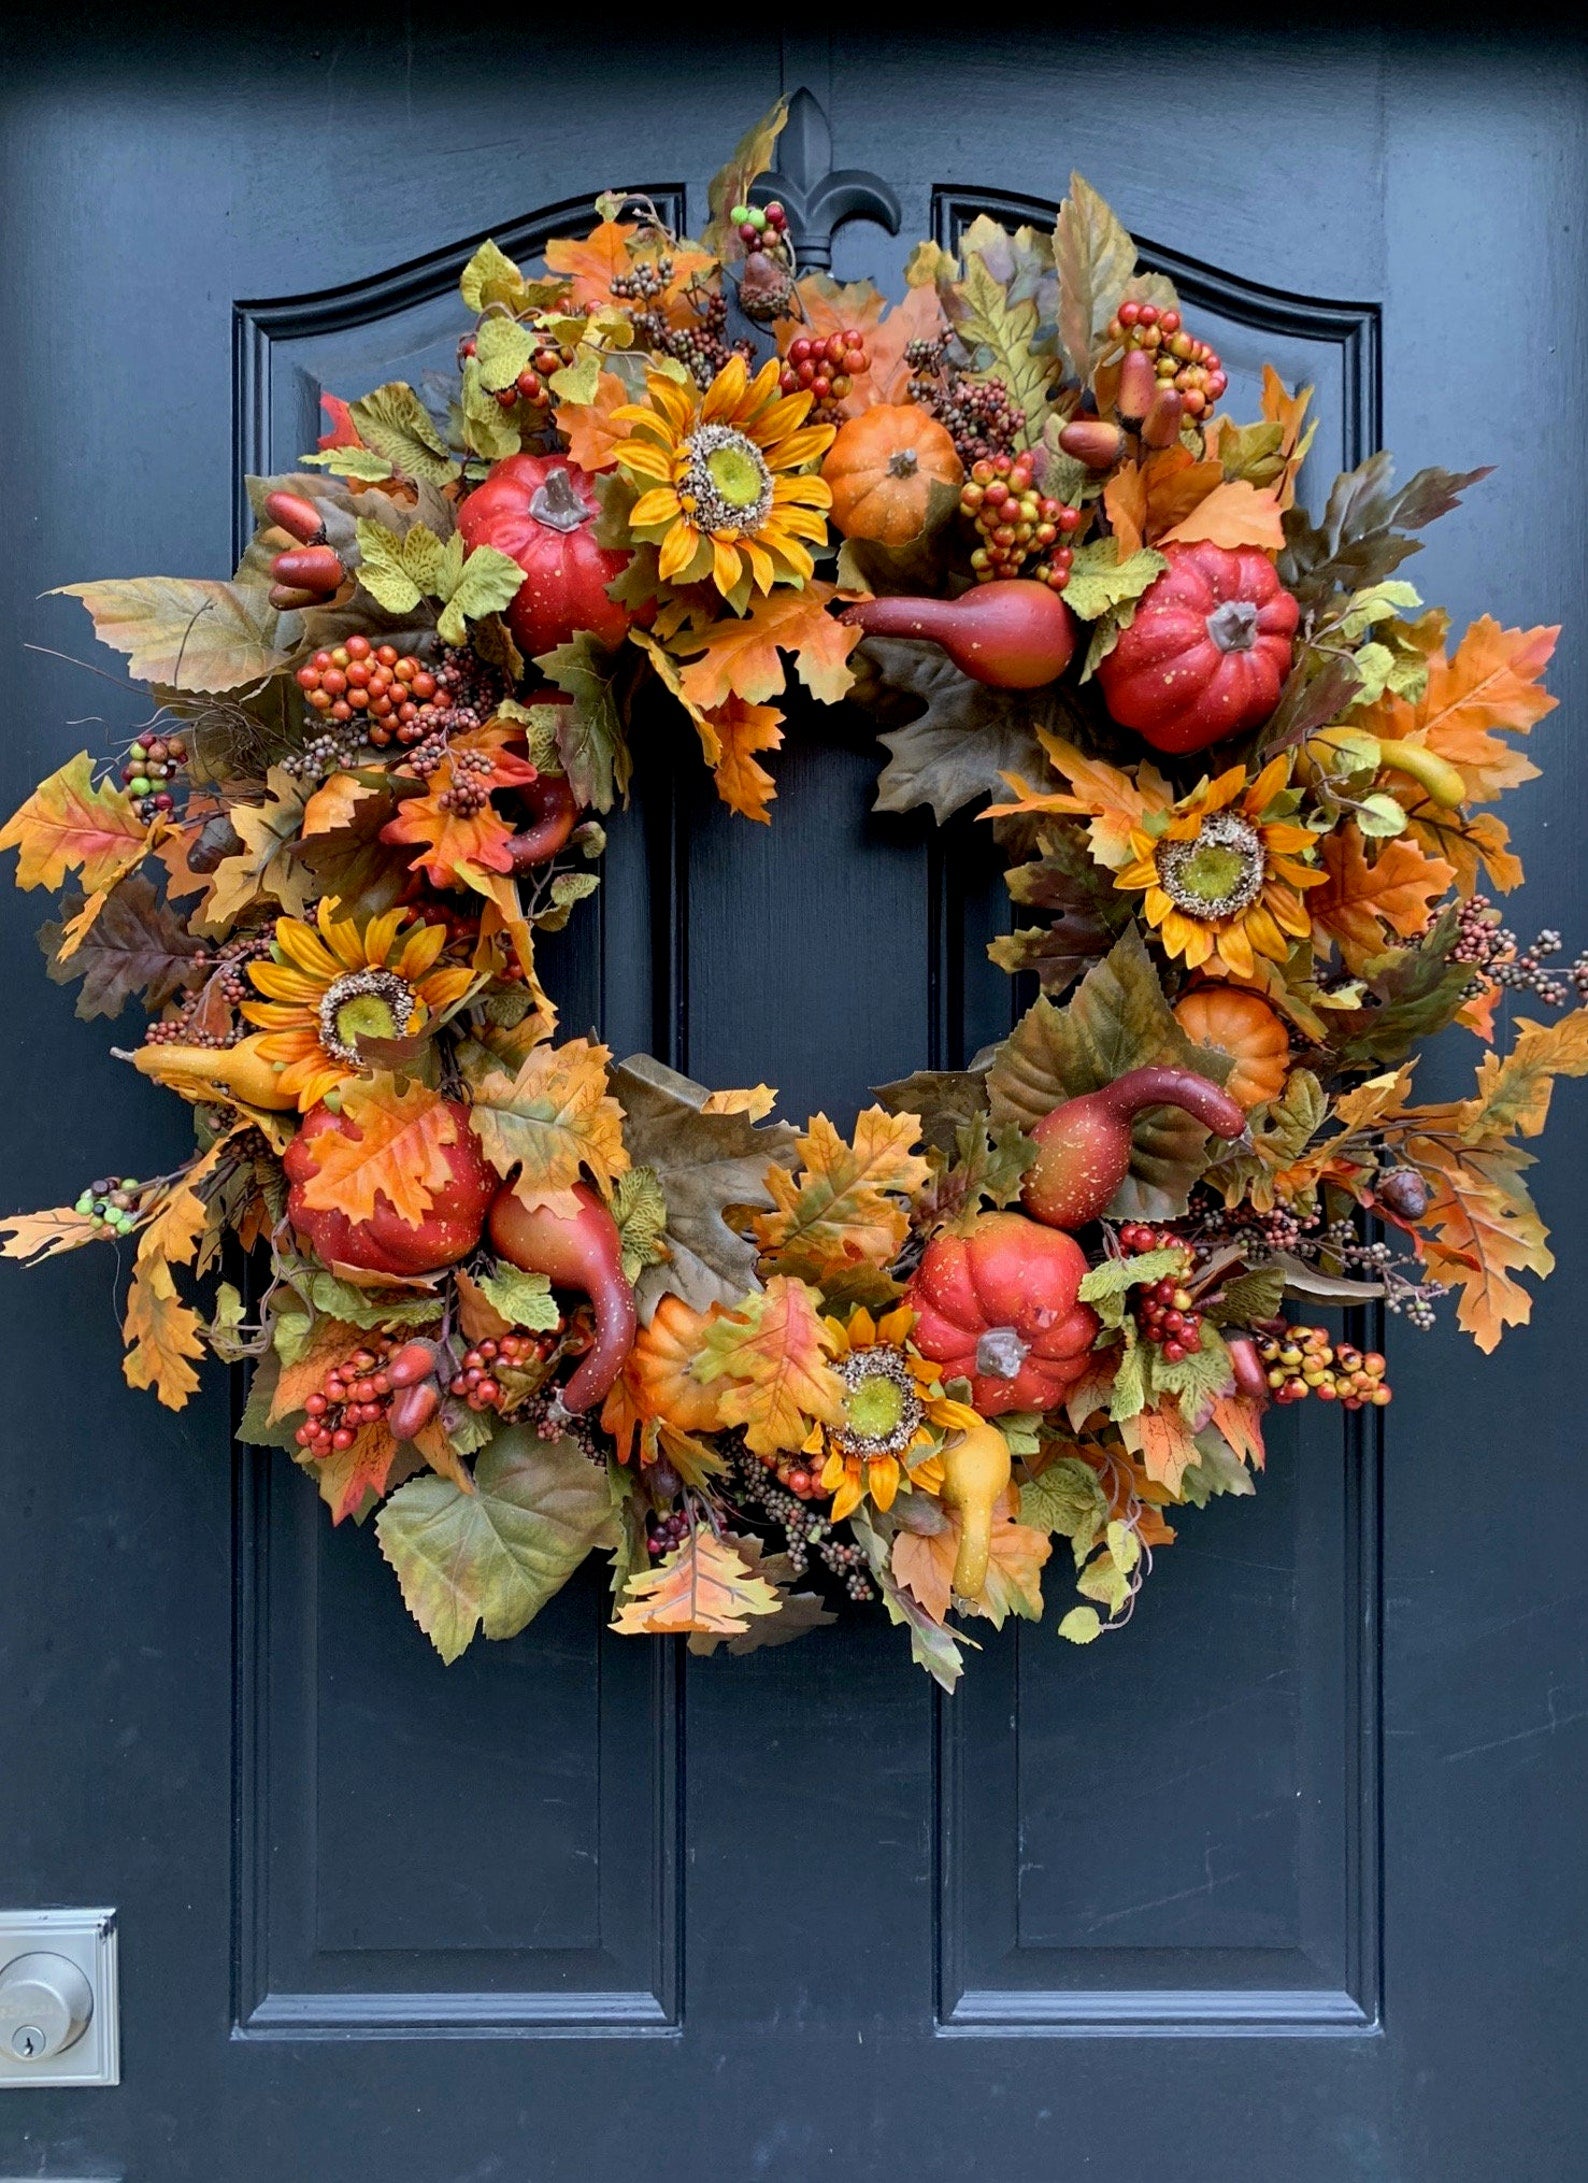 Realistic Fall Wreath with leaves, acorns, sunflowers, pumpkins and gourds